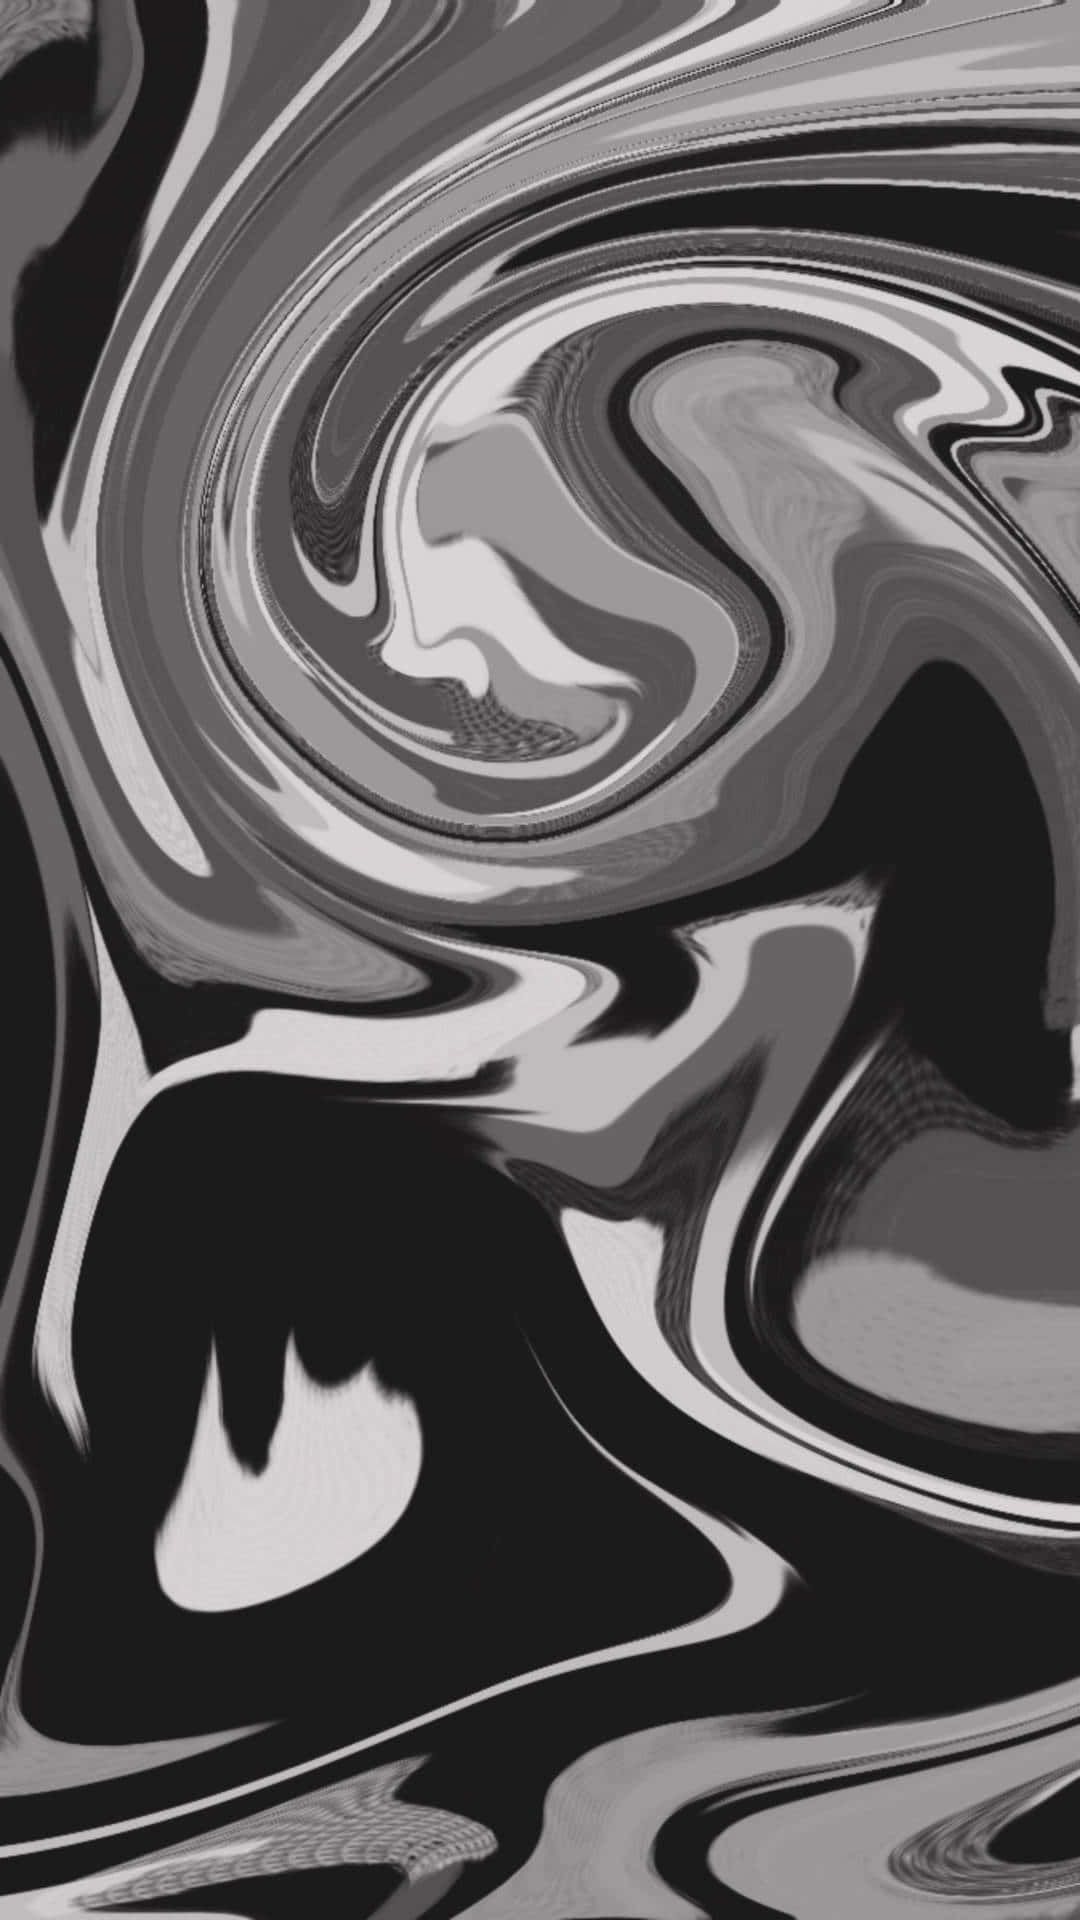 Abstract Black And Grey Swirls Wallpaper